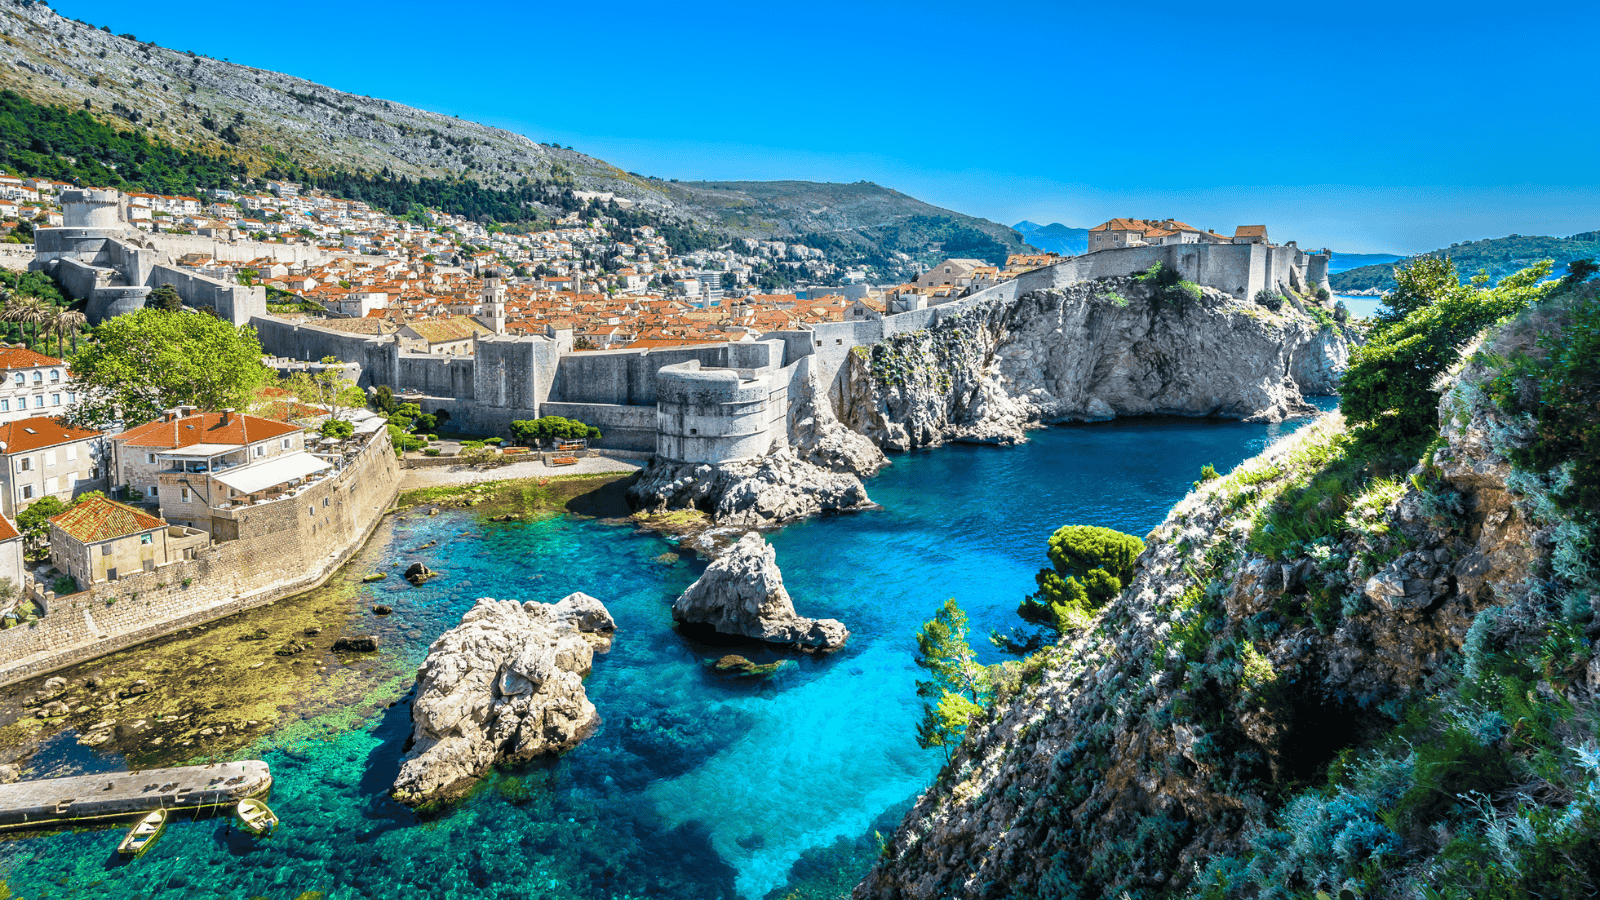 <p>Croatia is a fantastic summer getaway for budget-conscious travelers. Its location on the Adriatic Sea is famous for its vibrant coastlines and rich cultural heritage. A road trip down the coast will allow you to tour <a href="https://whatthefab.com/bucket-list-unesco-world-heritage-sites.html" rel="follow">UNESCO World Heritage Sites</a>, dine on fresh local cuisine, and enjoy the scenic waterfront views. Add Split and Dubrovnik to your sightseeing itinerary for low-cost activities like wandering the city plazas and enjoying the public beaches. </p>